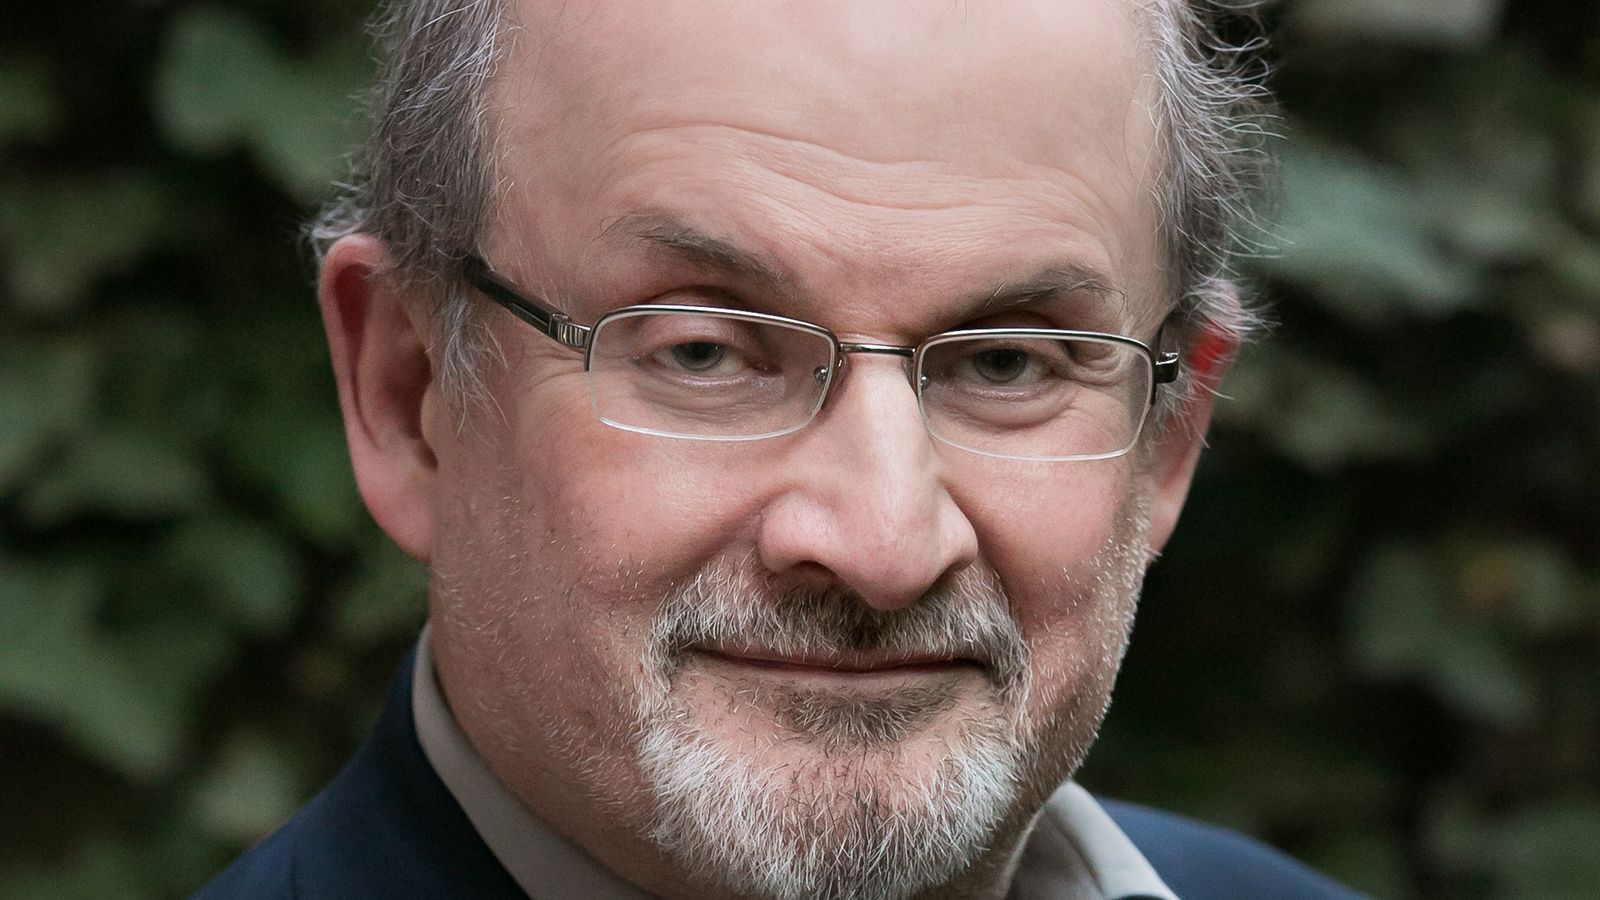 Salman Rushdie has lost sight in one eye and use of hand after stabbing, says agent